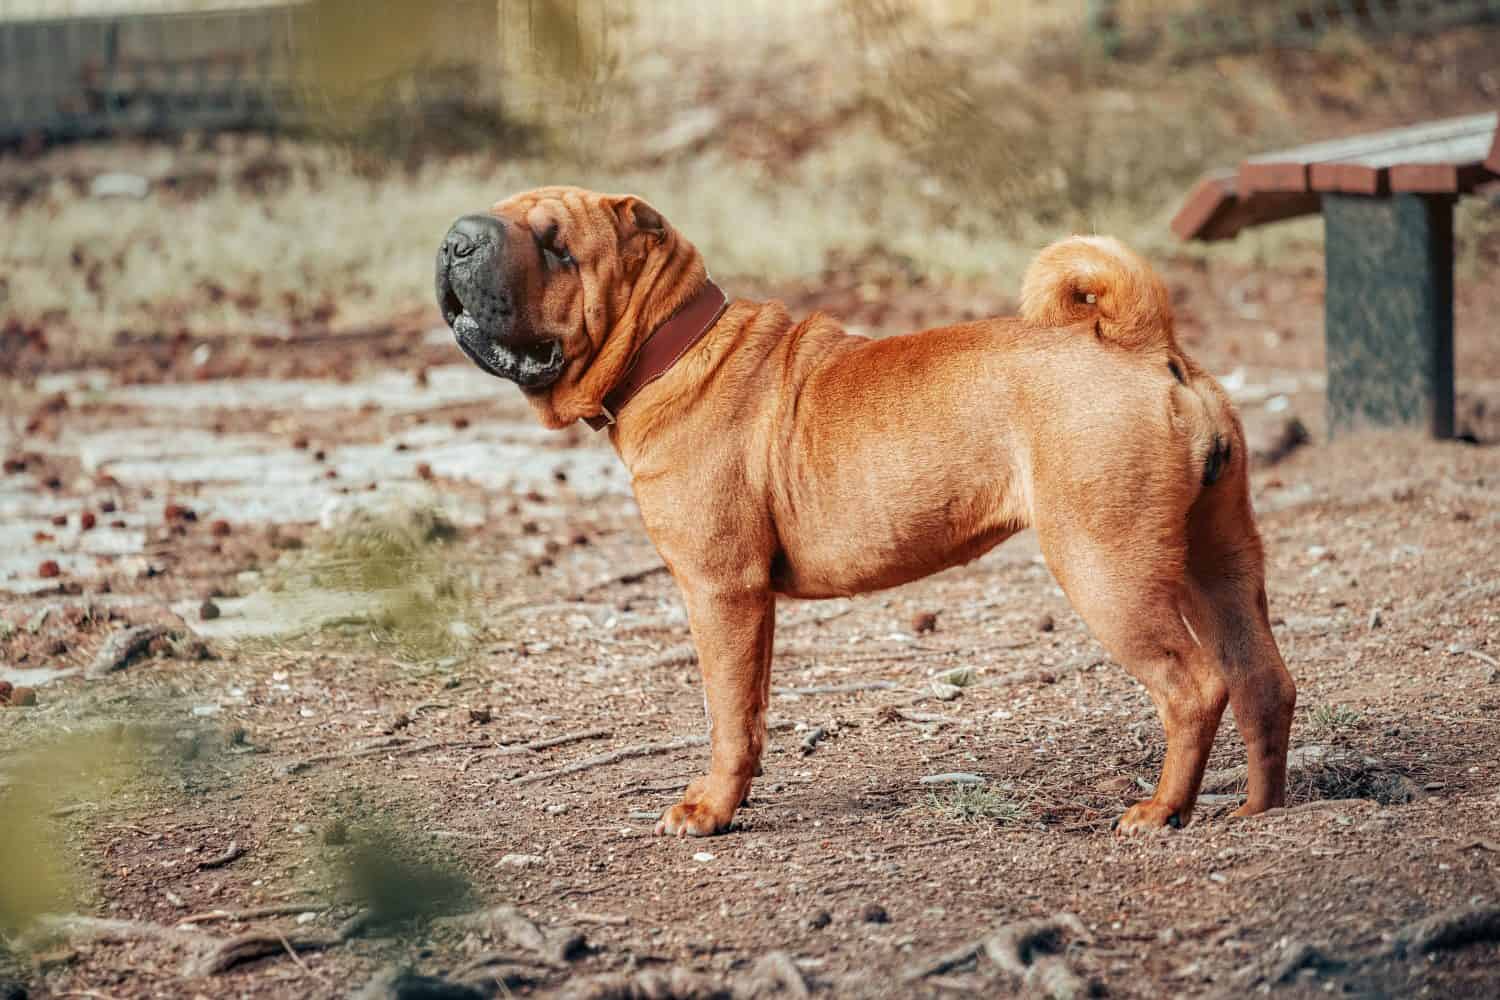 Shar Pei dog breed walking in park. Unusual and funny adorable pet from China. Adorable muzzle with numerous wrinkles and saliva secretions